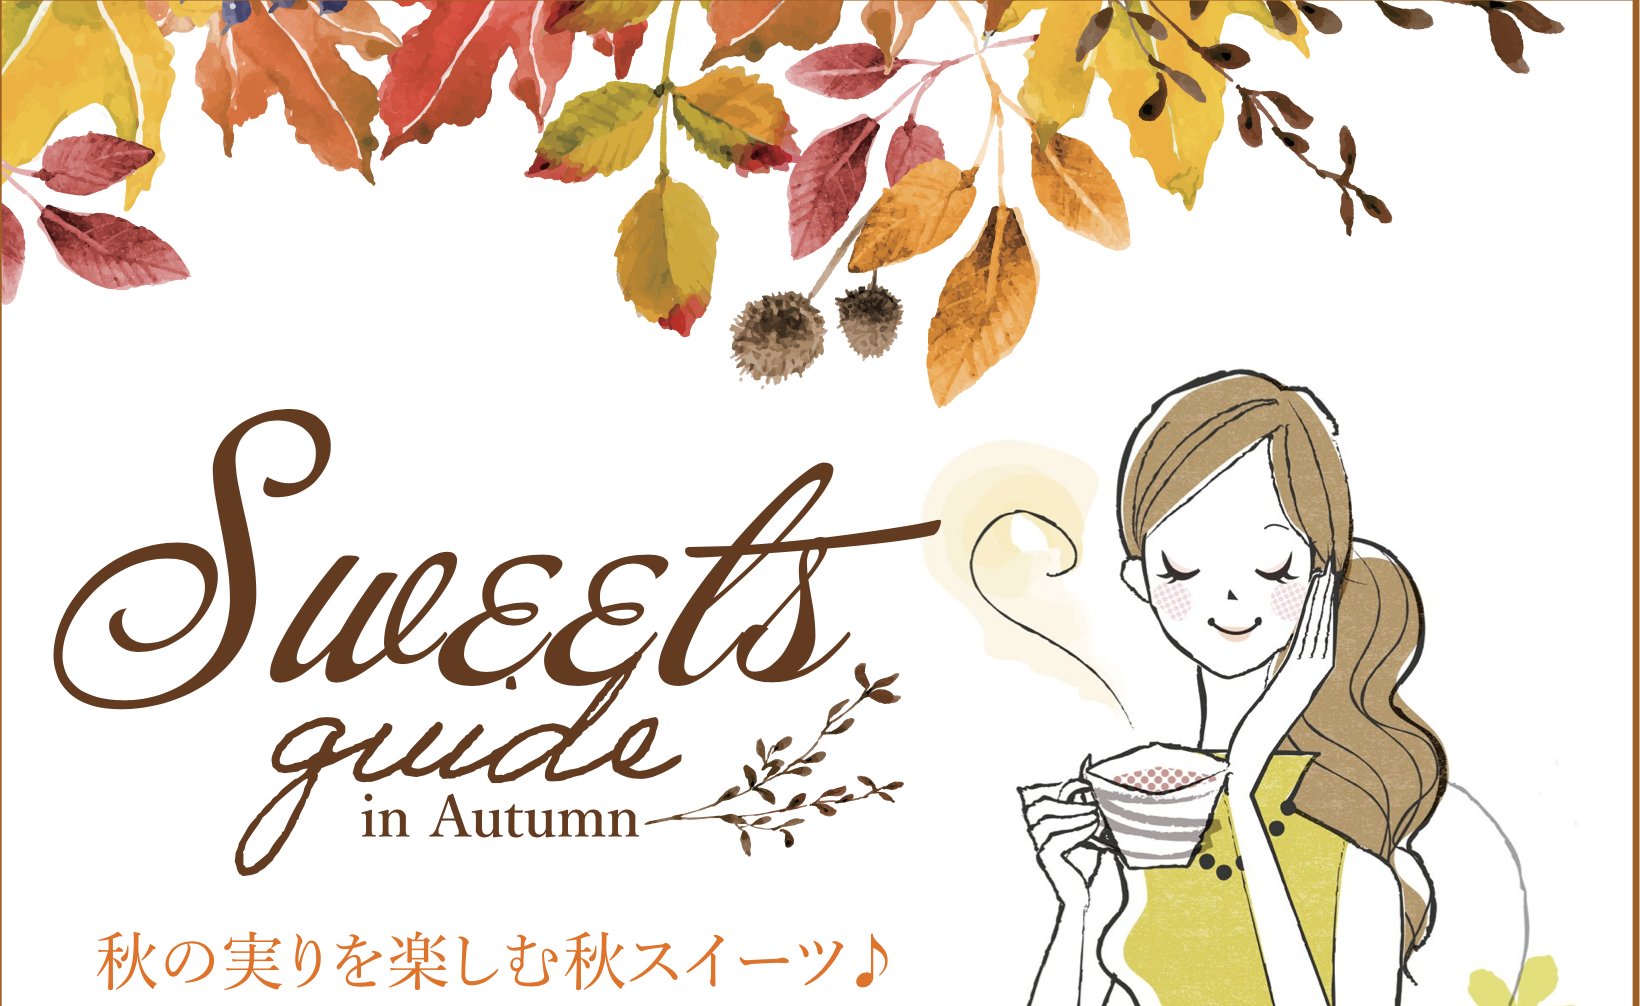 Sweets guide in Autumn